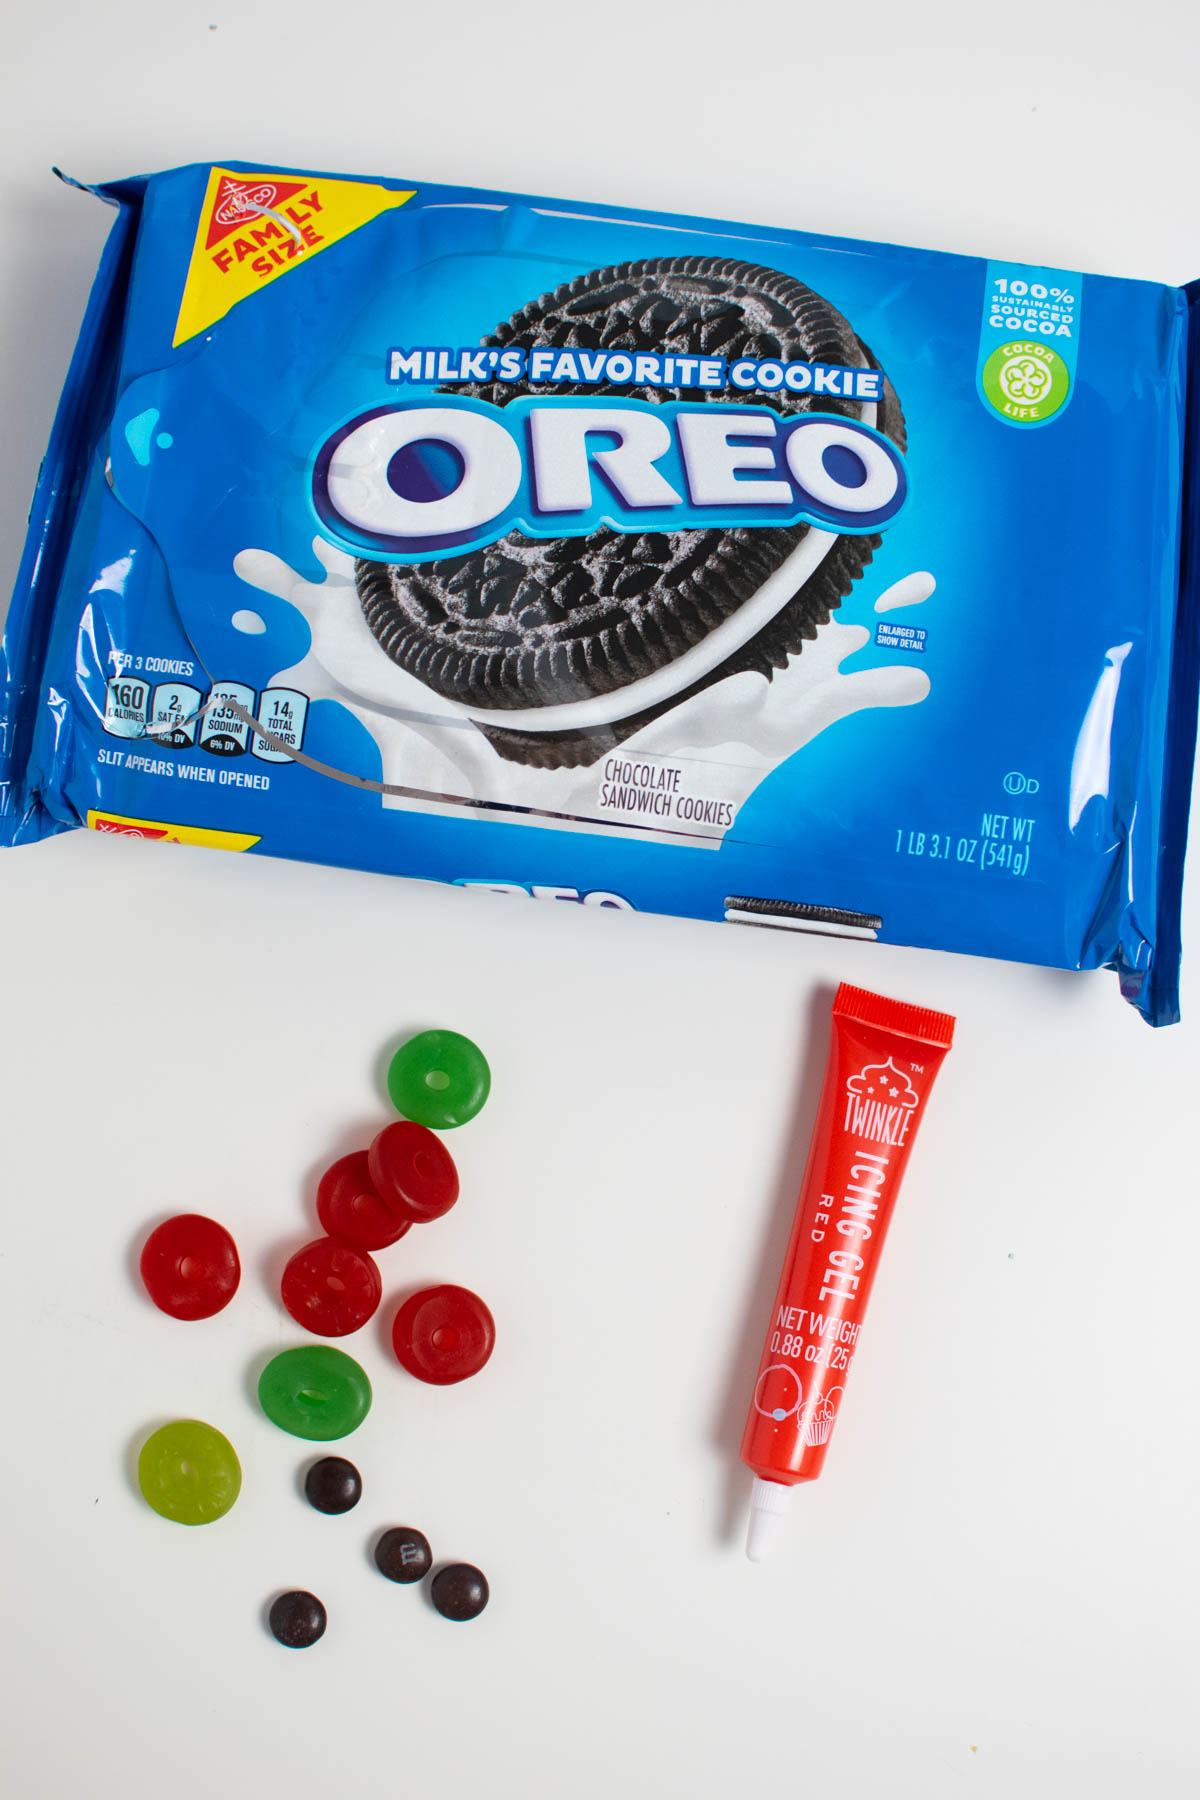 Oreo eyeball ingredients on white table including candies, red icing gel, and package of Oreos.